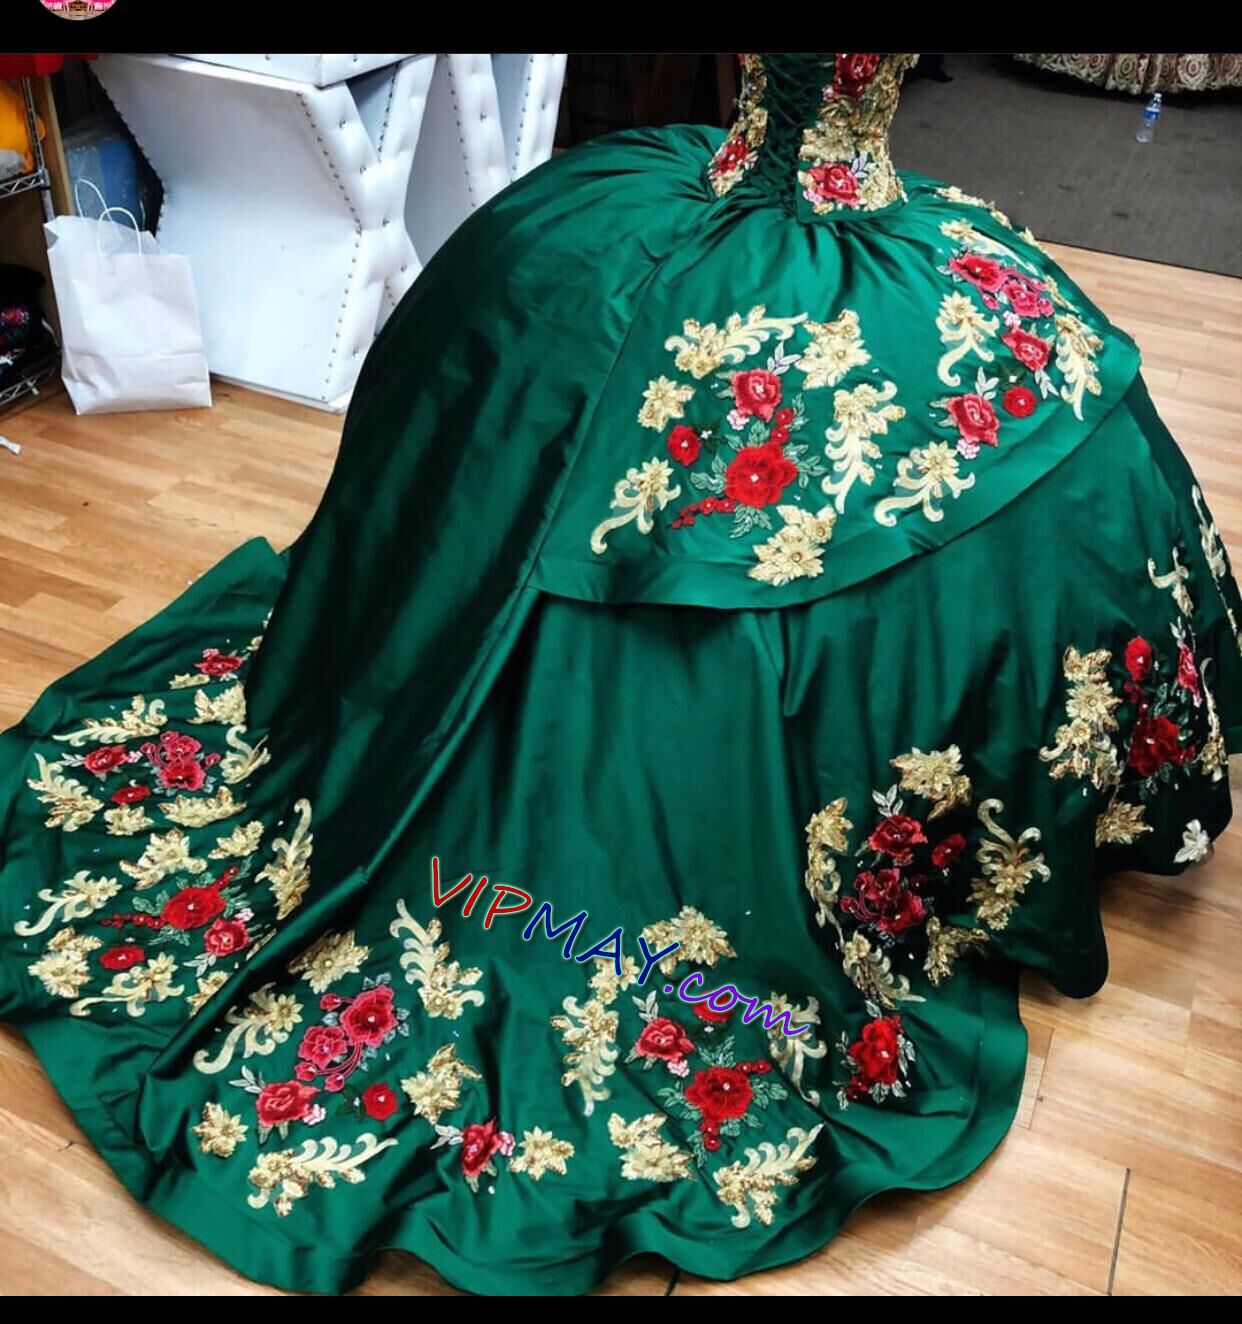 quinceanera dress with a train,virgin mary quinceanera dress,2021 quinceanera dress,virgen de guadalupe quinceanera dress,virgin mary charo quinceanera dress,satin quinceanera dress,floral embroidered quinceanera dress,green and gold quinceanera dress,green quinceanera dress,traditional mexican quinceanera dress,mexican themed quinceanera dress,